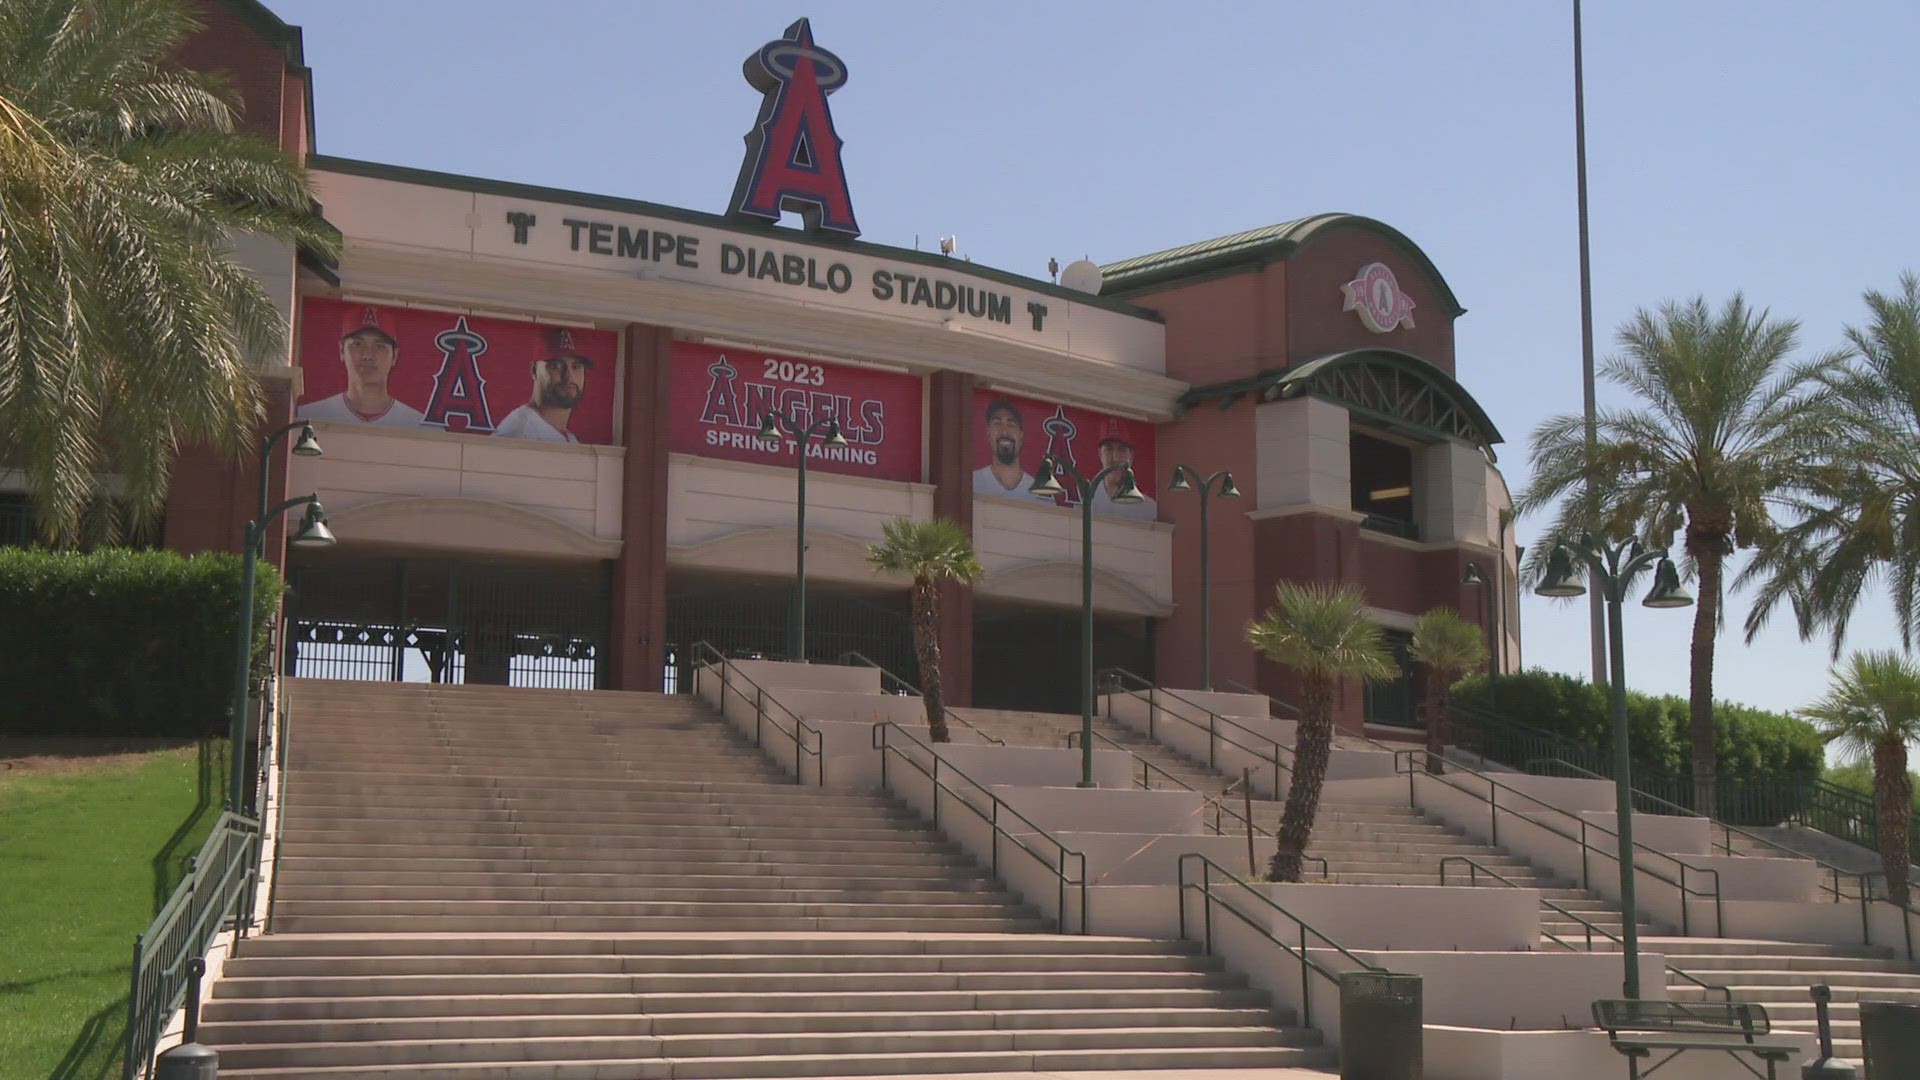 A new report shows the economic impact of the Cactus League during the 2023 spring season.